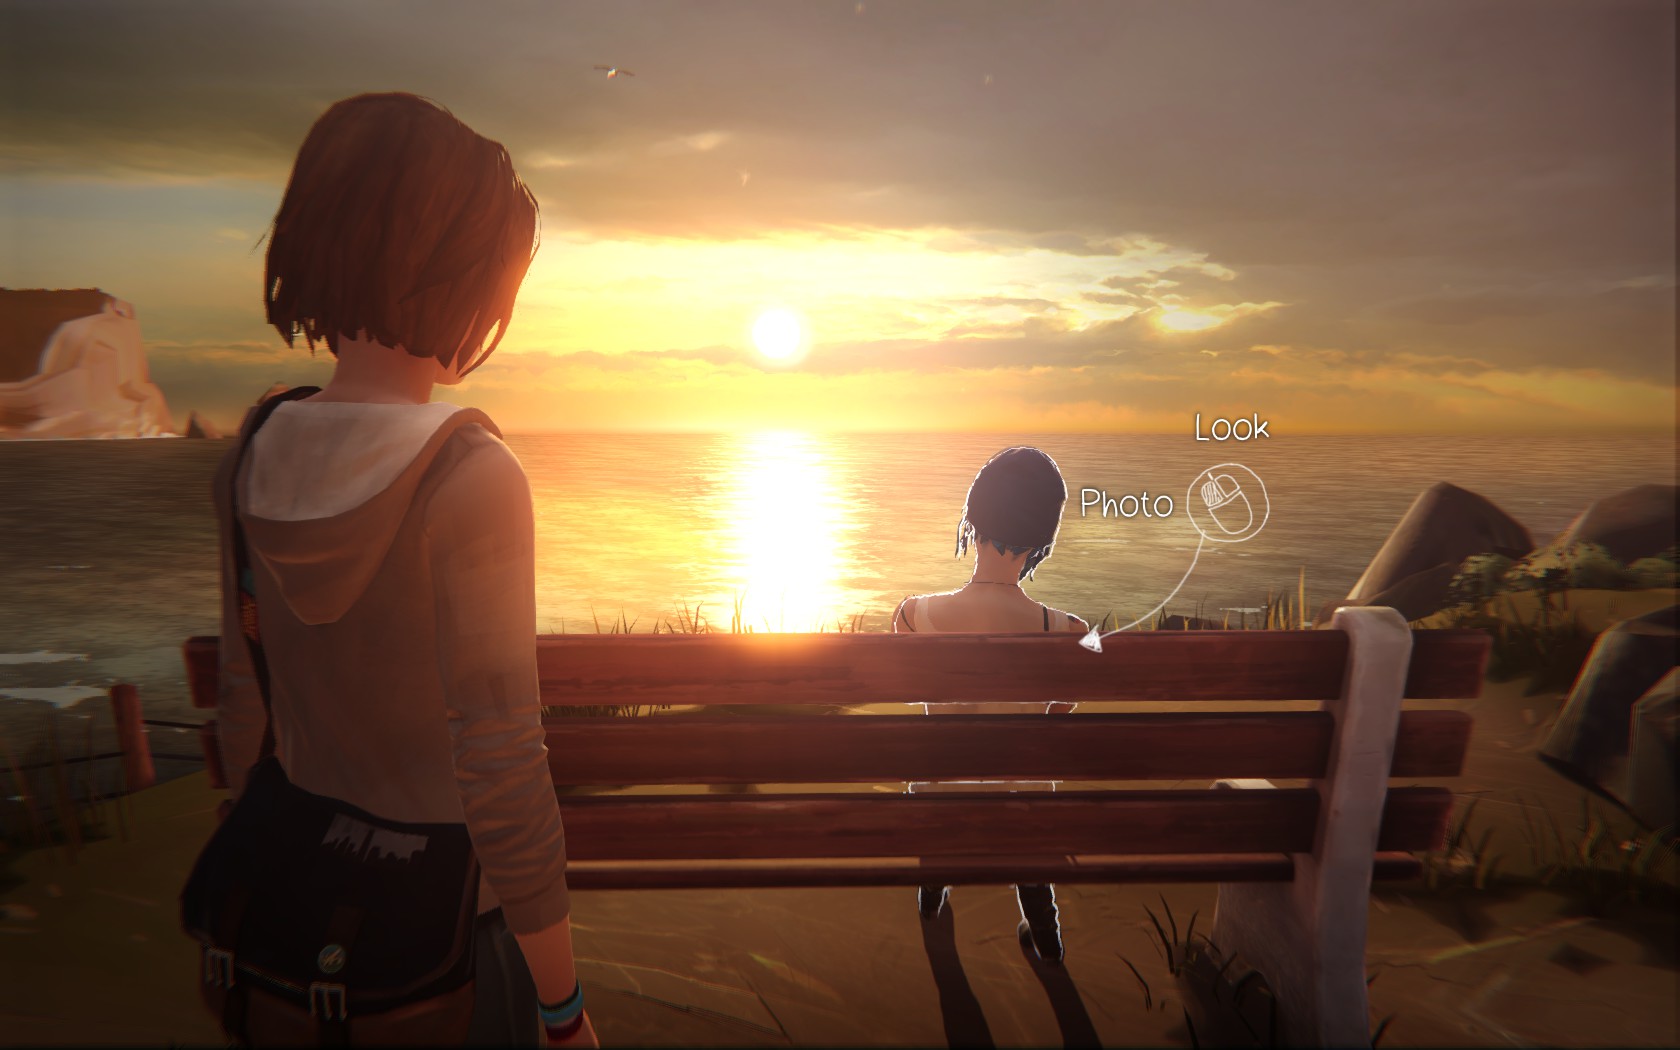 Life s not being lived. Life is Strange 1. Life is Strange лавочка. Life is Strange шторм у маяка. Life is Strange Маяк.